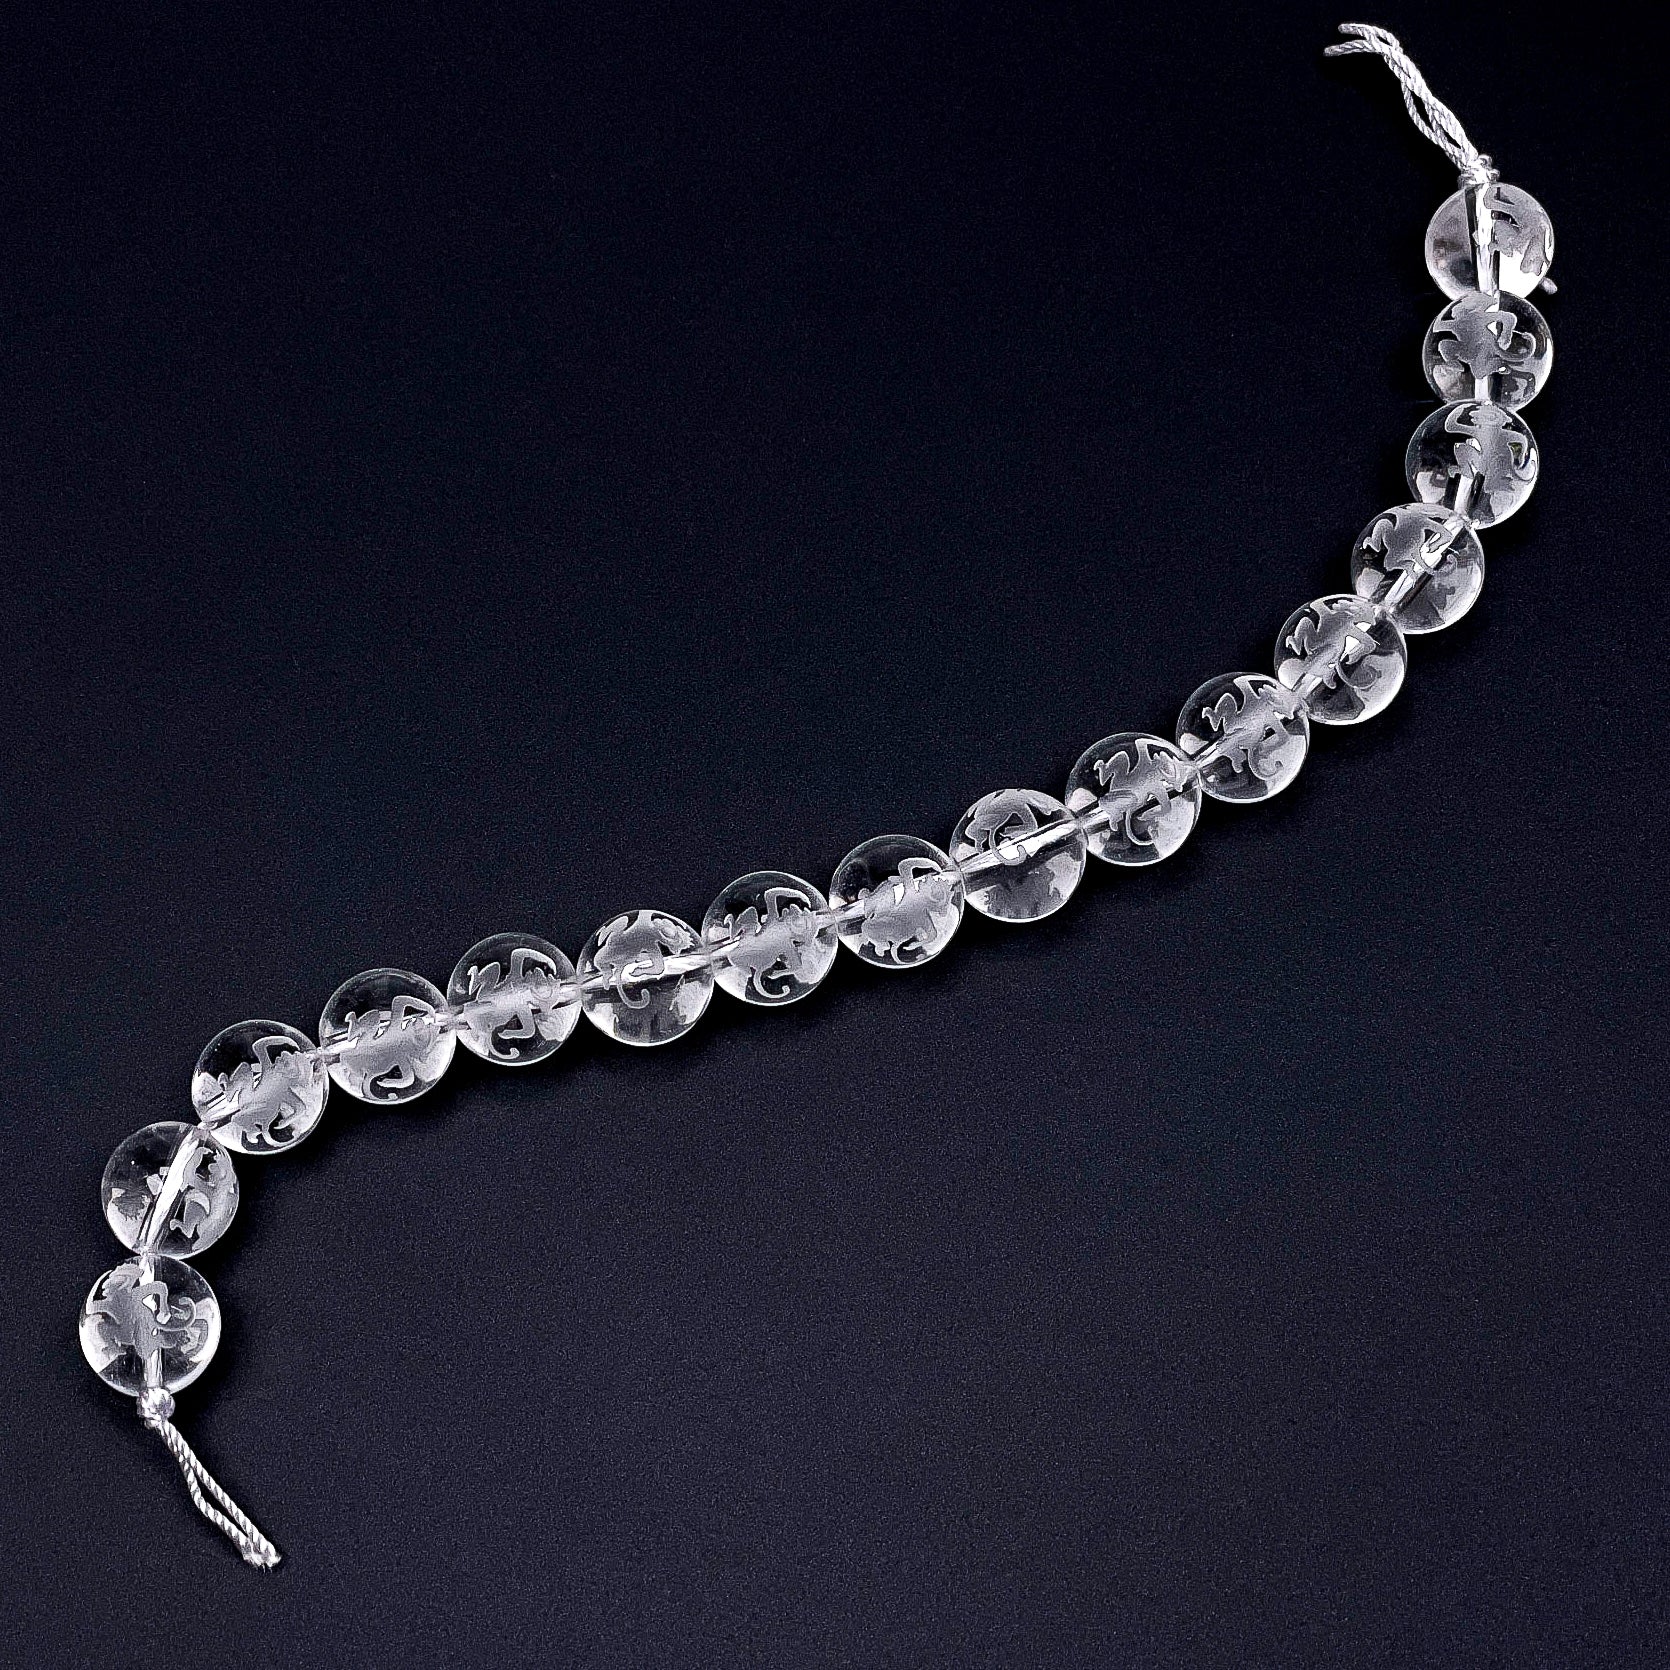 Crystal Quartz 12mm Round with Etched Monkey Bead - 7.5" Strand